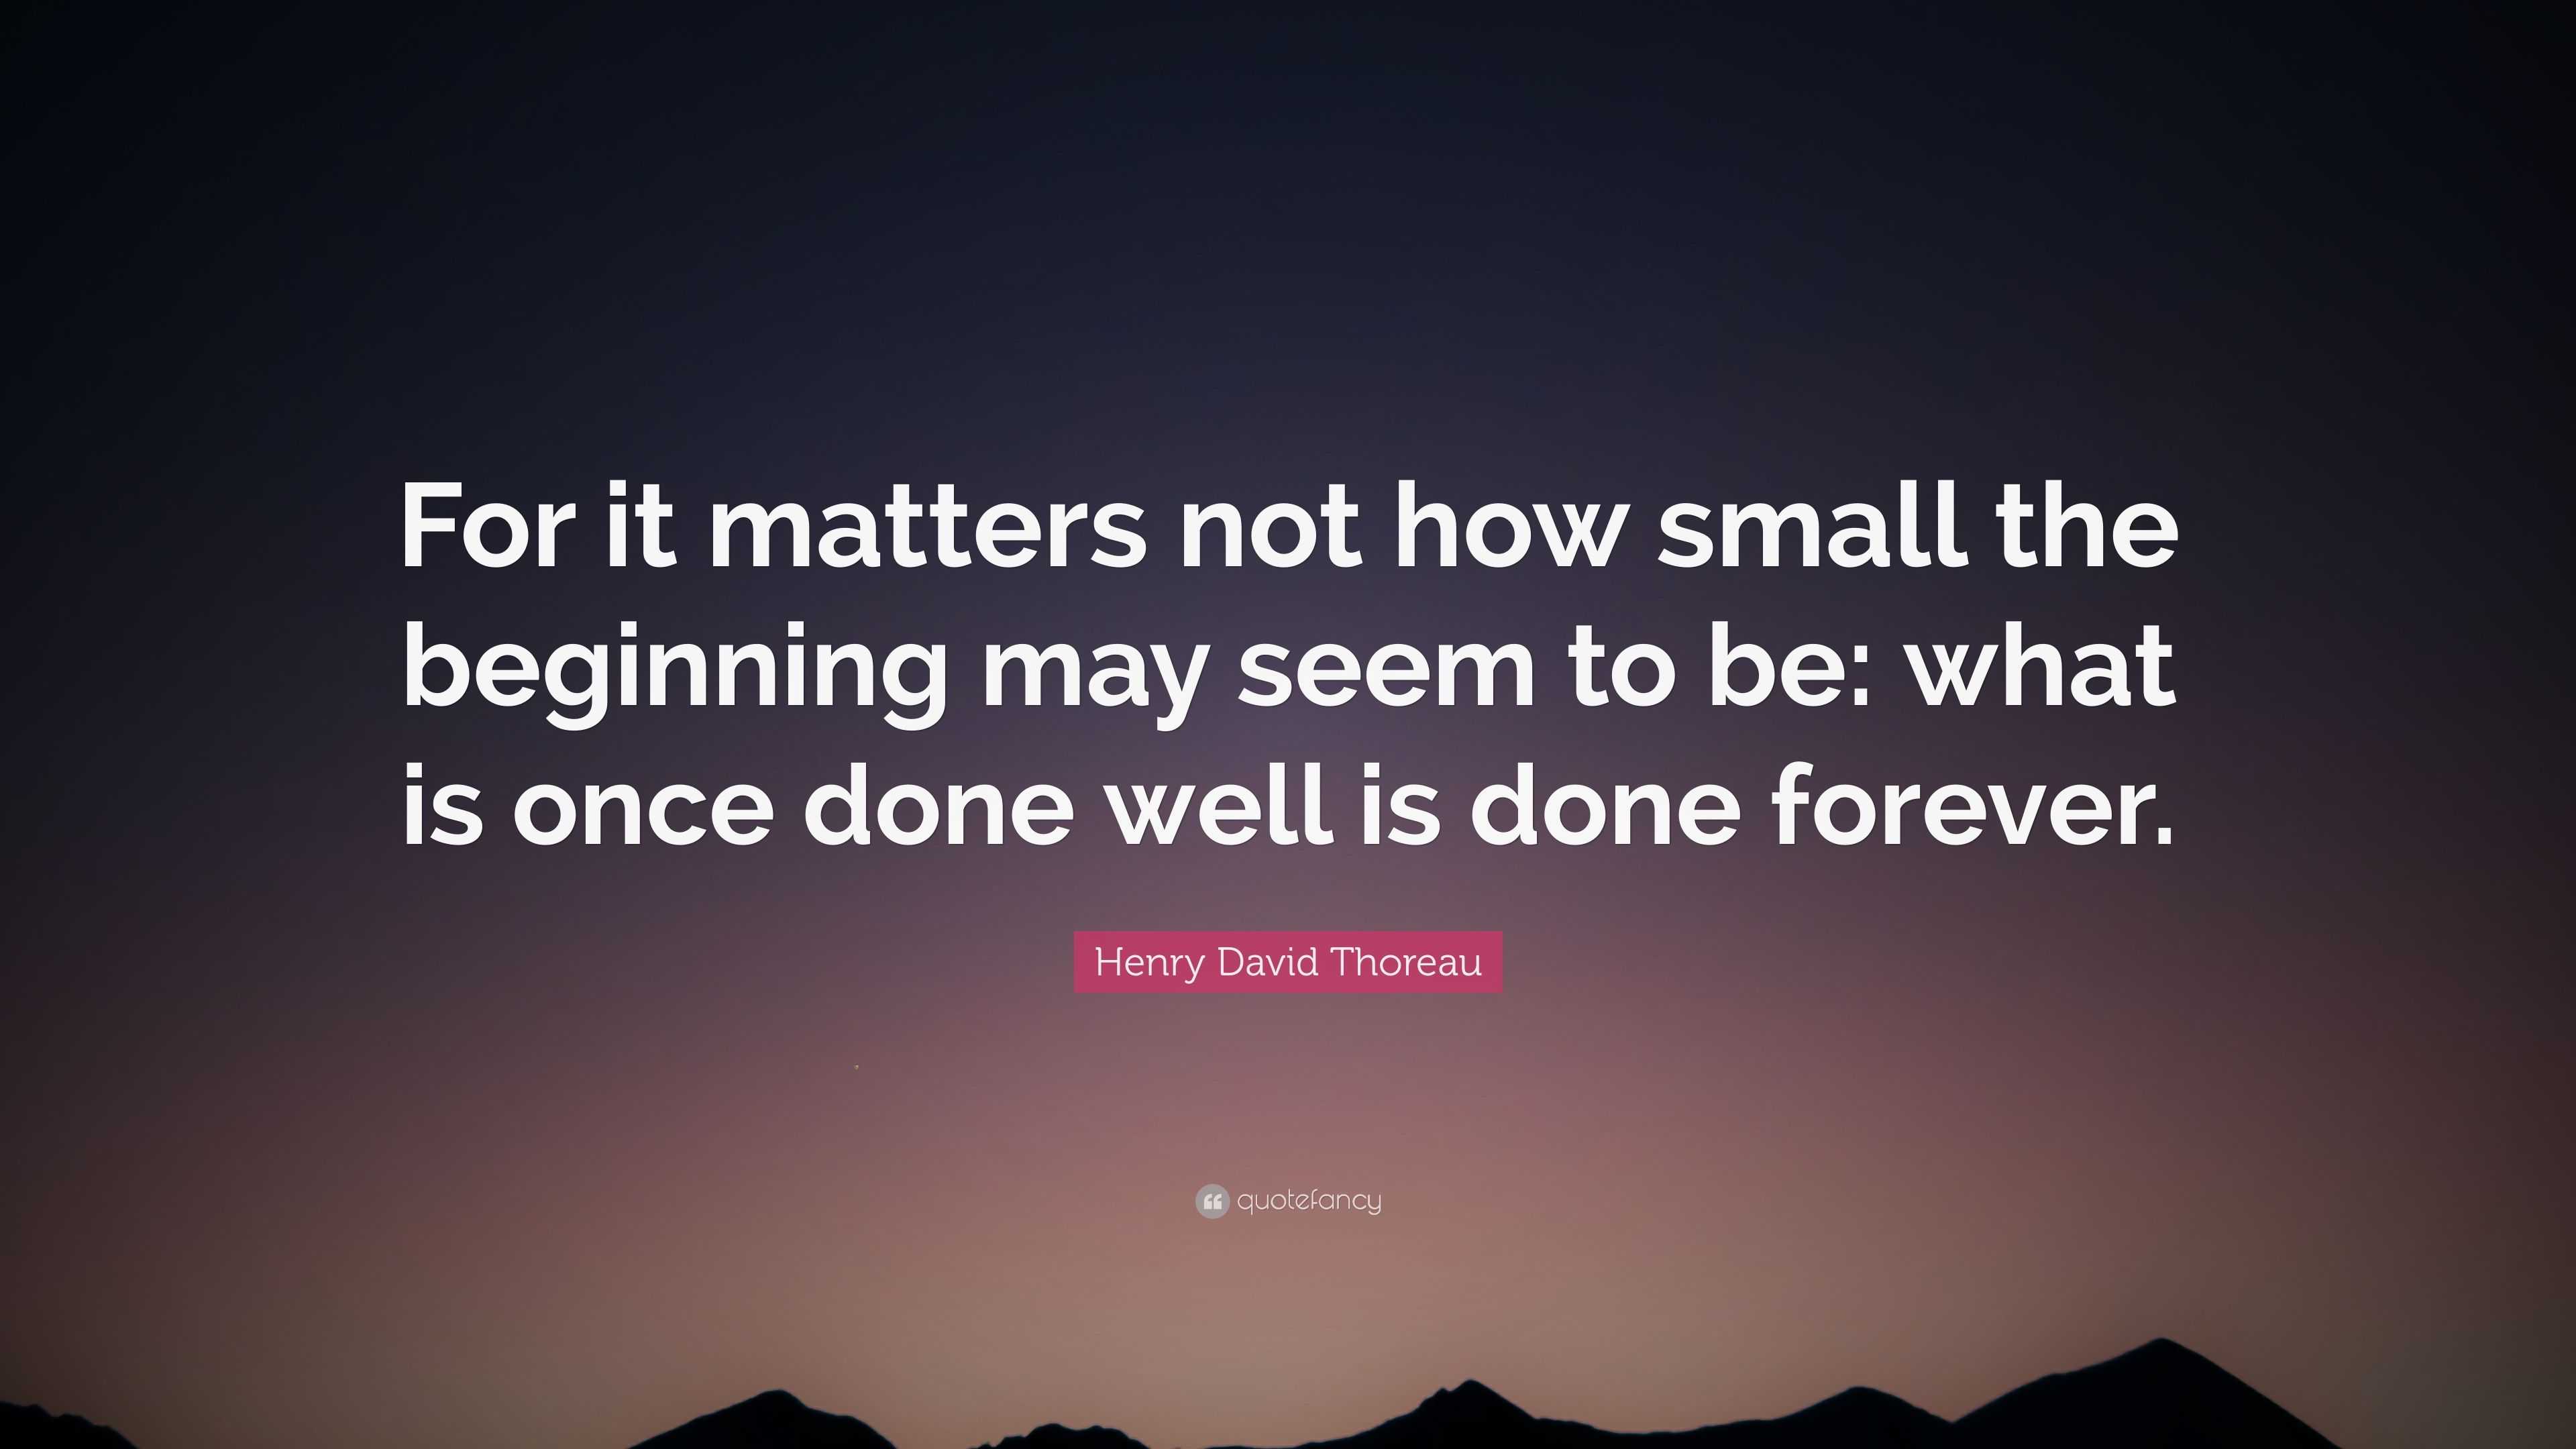 Henry David Thoreau Quote: “For it matters not how small the beginning ...